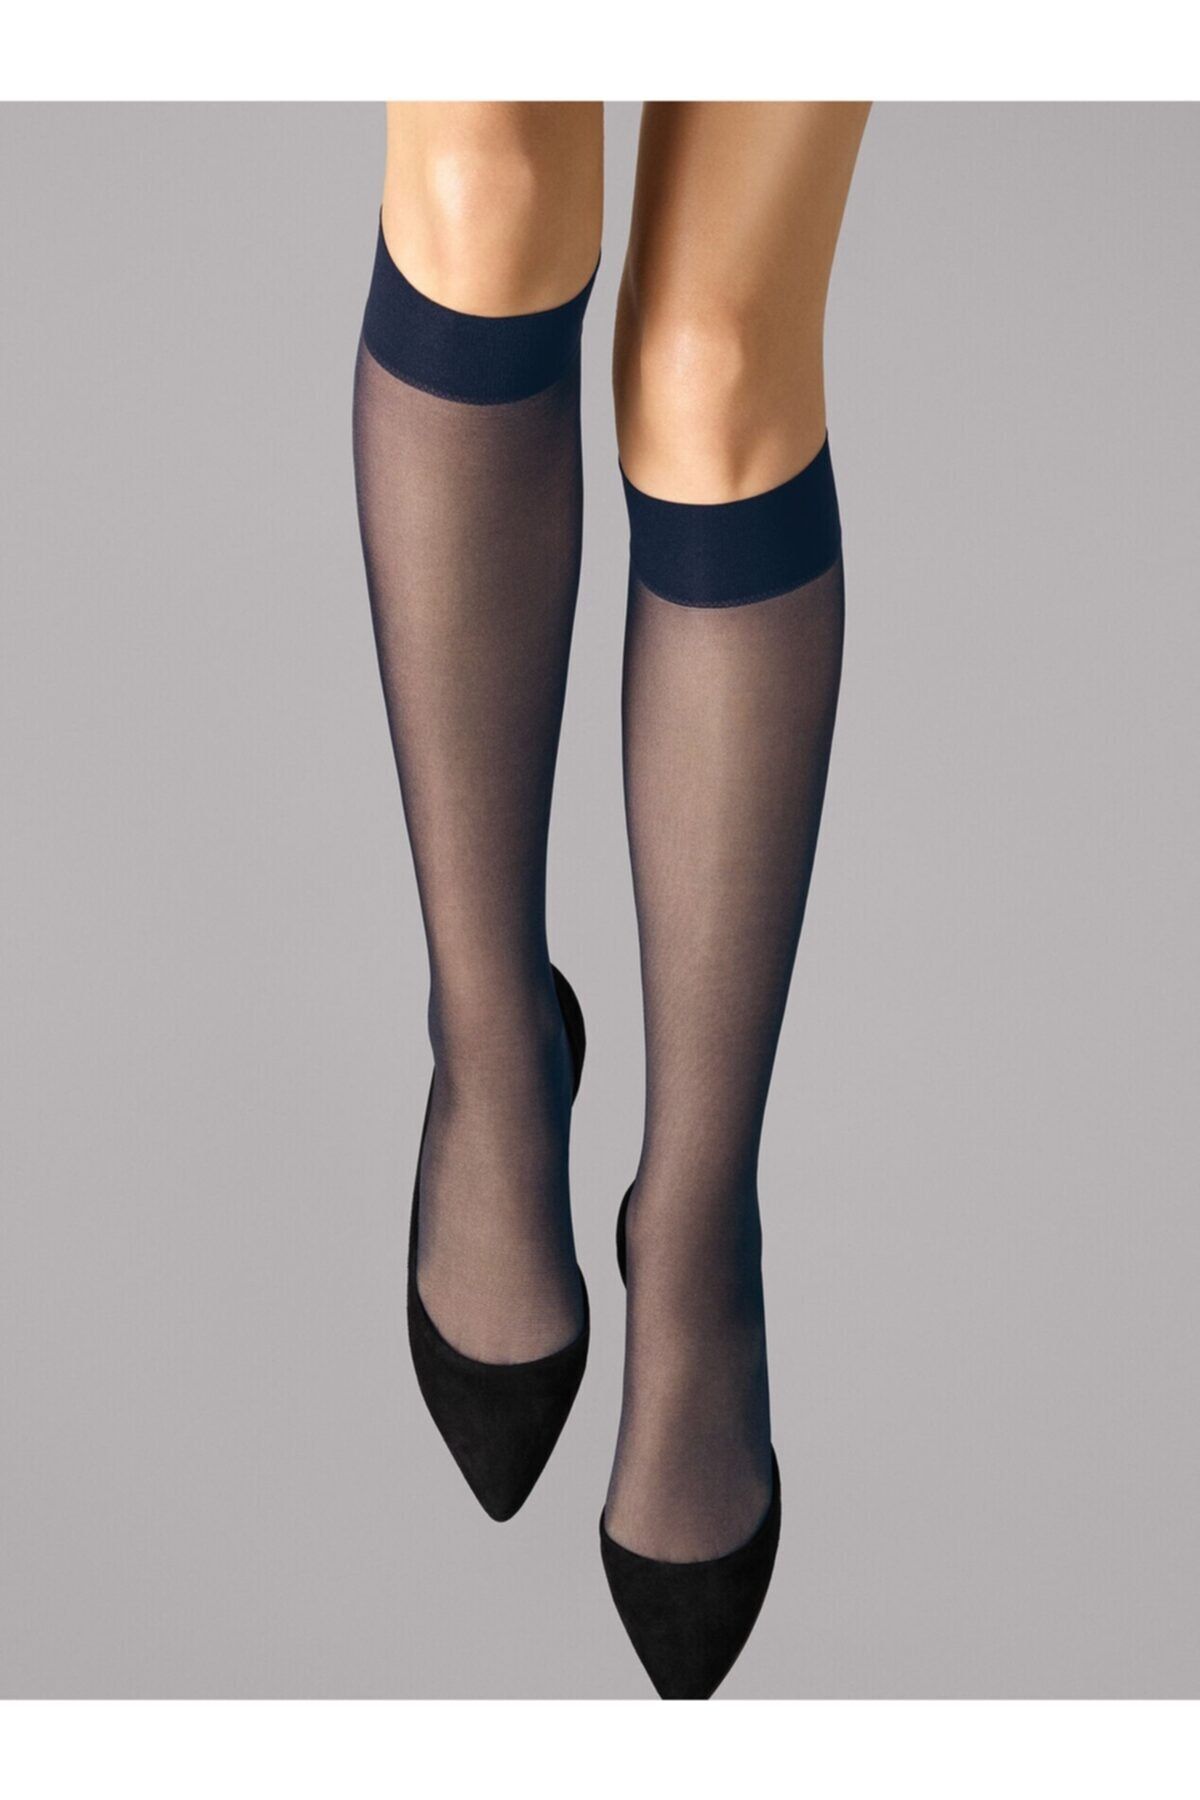 Wolford Satin Touch 20 Knee-highs